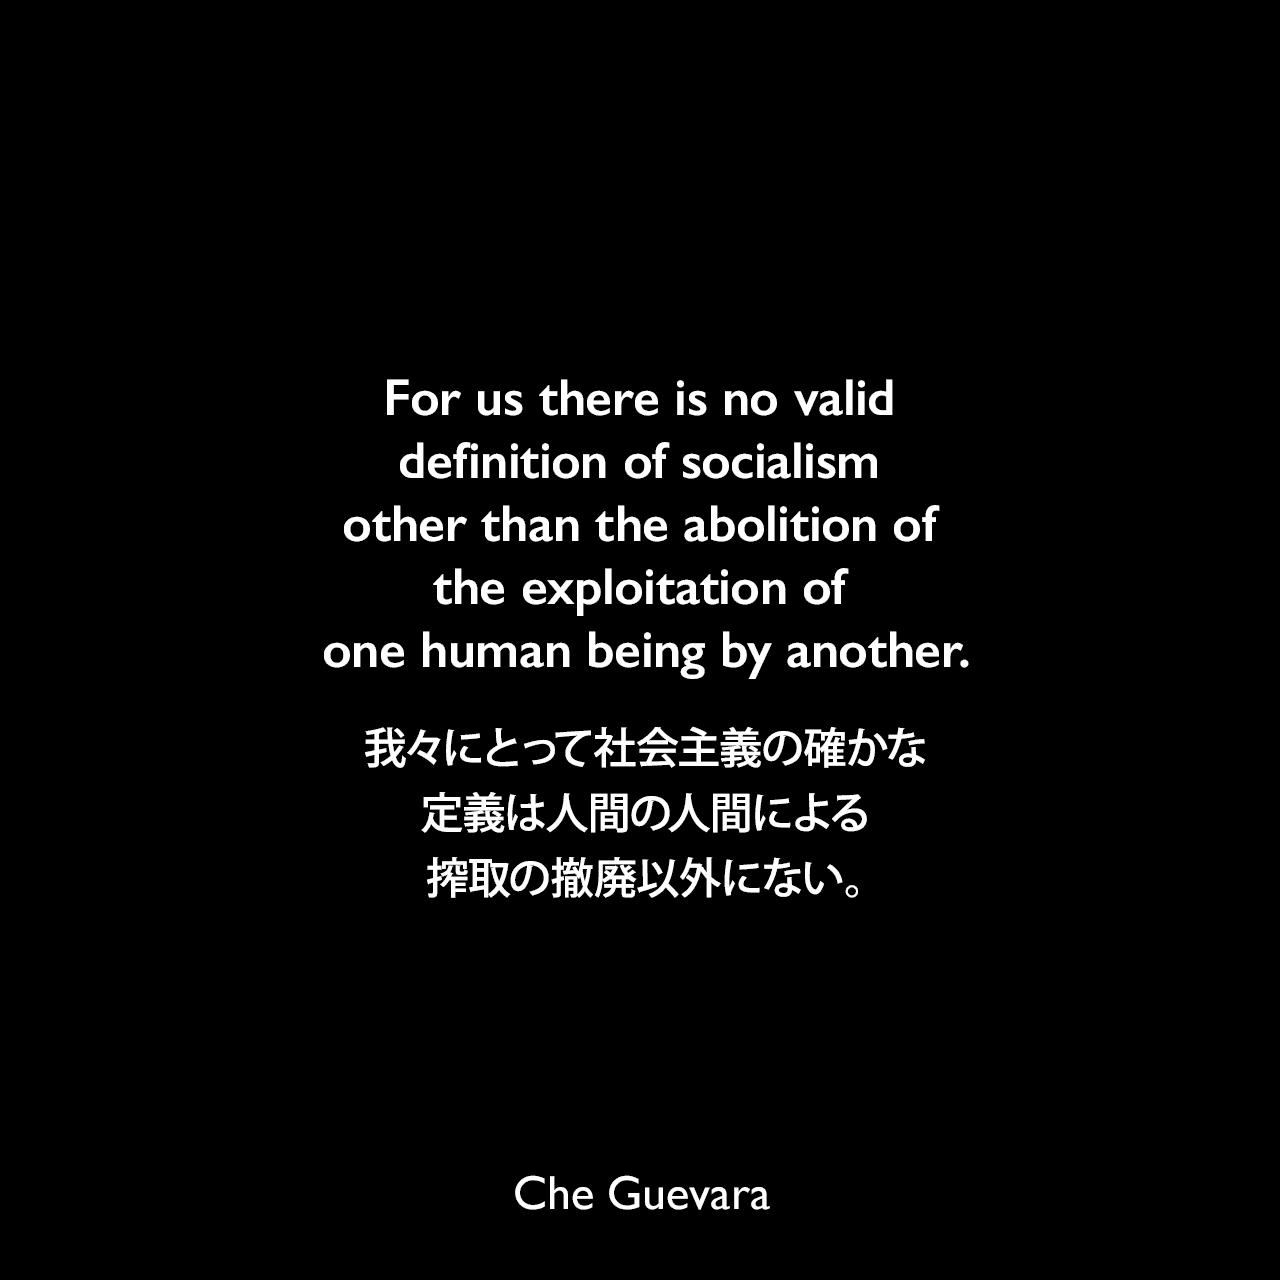 For us there is no valid definition of socialism other than the abolition of the exploitation of one human being by another.我々にとって社会主義の確かな定義は人間の人間による搾取の撤廃以外にない。Che Guevara